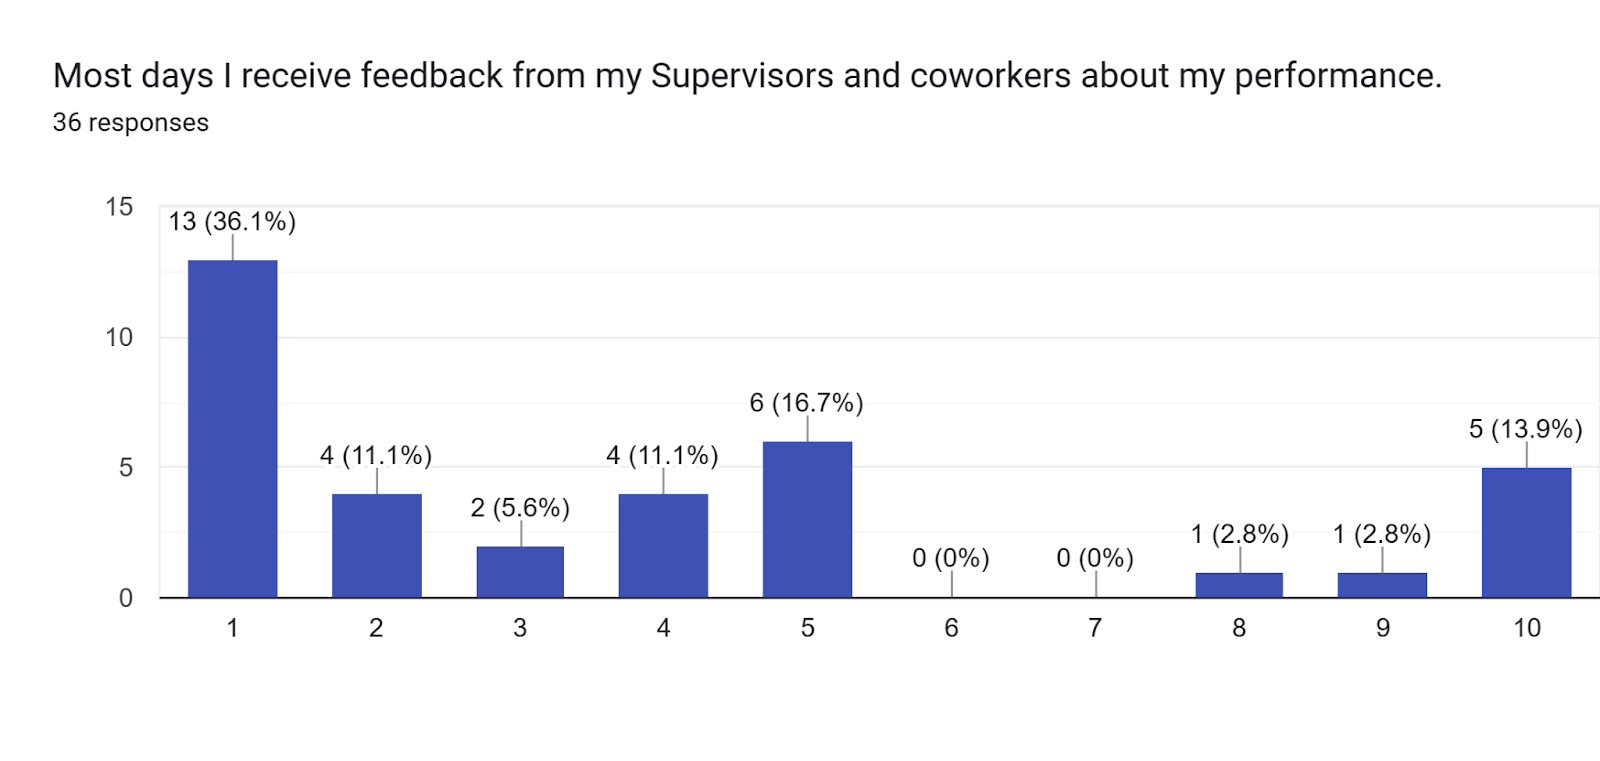 Forms response chart. Question title: Most days I receive feedback from my Supervisors and coworkers about my performance.. Number of responses: 36 responses.